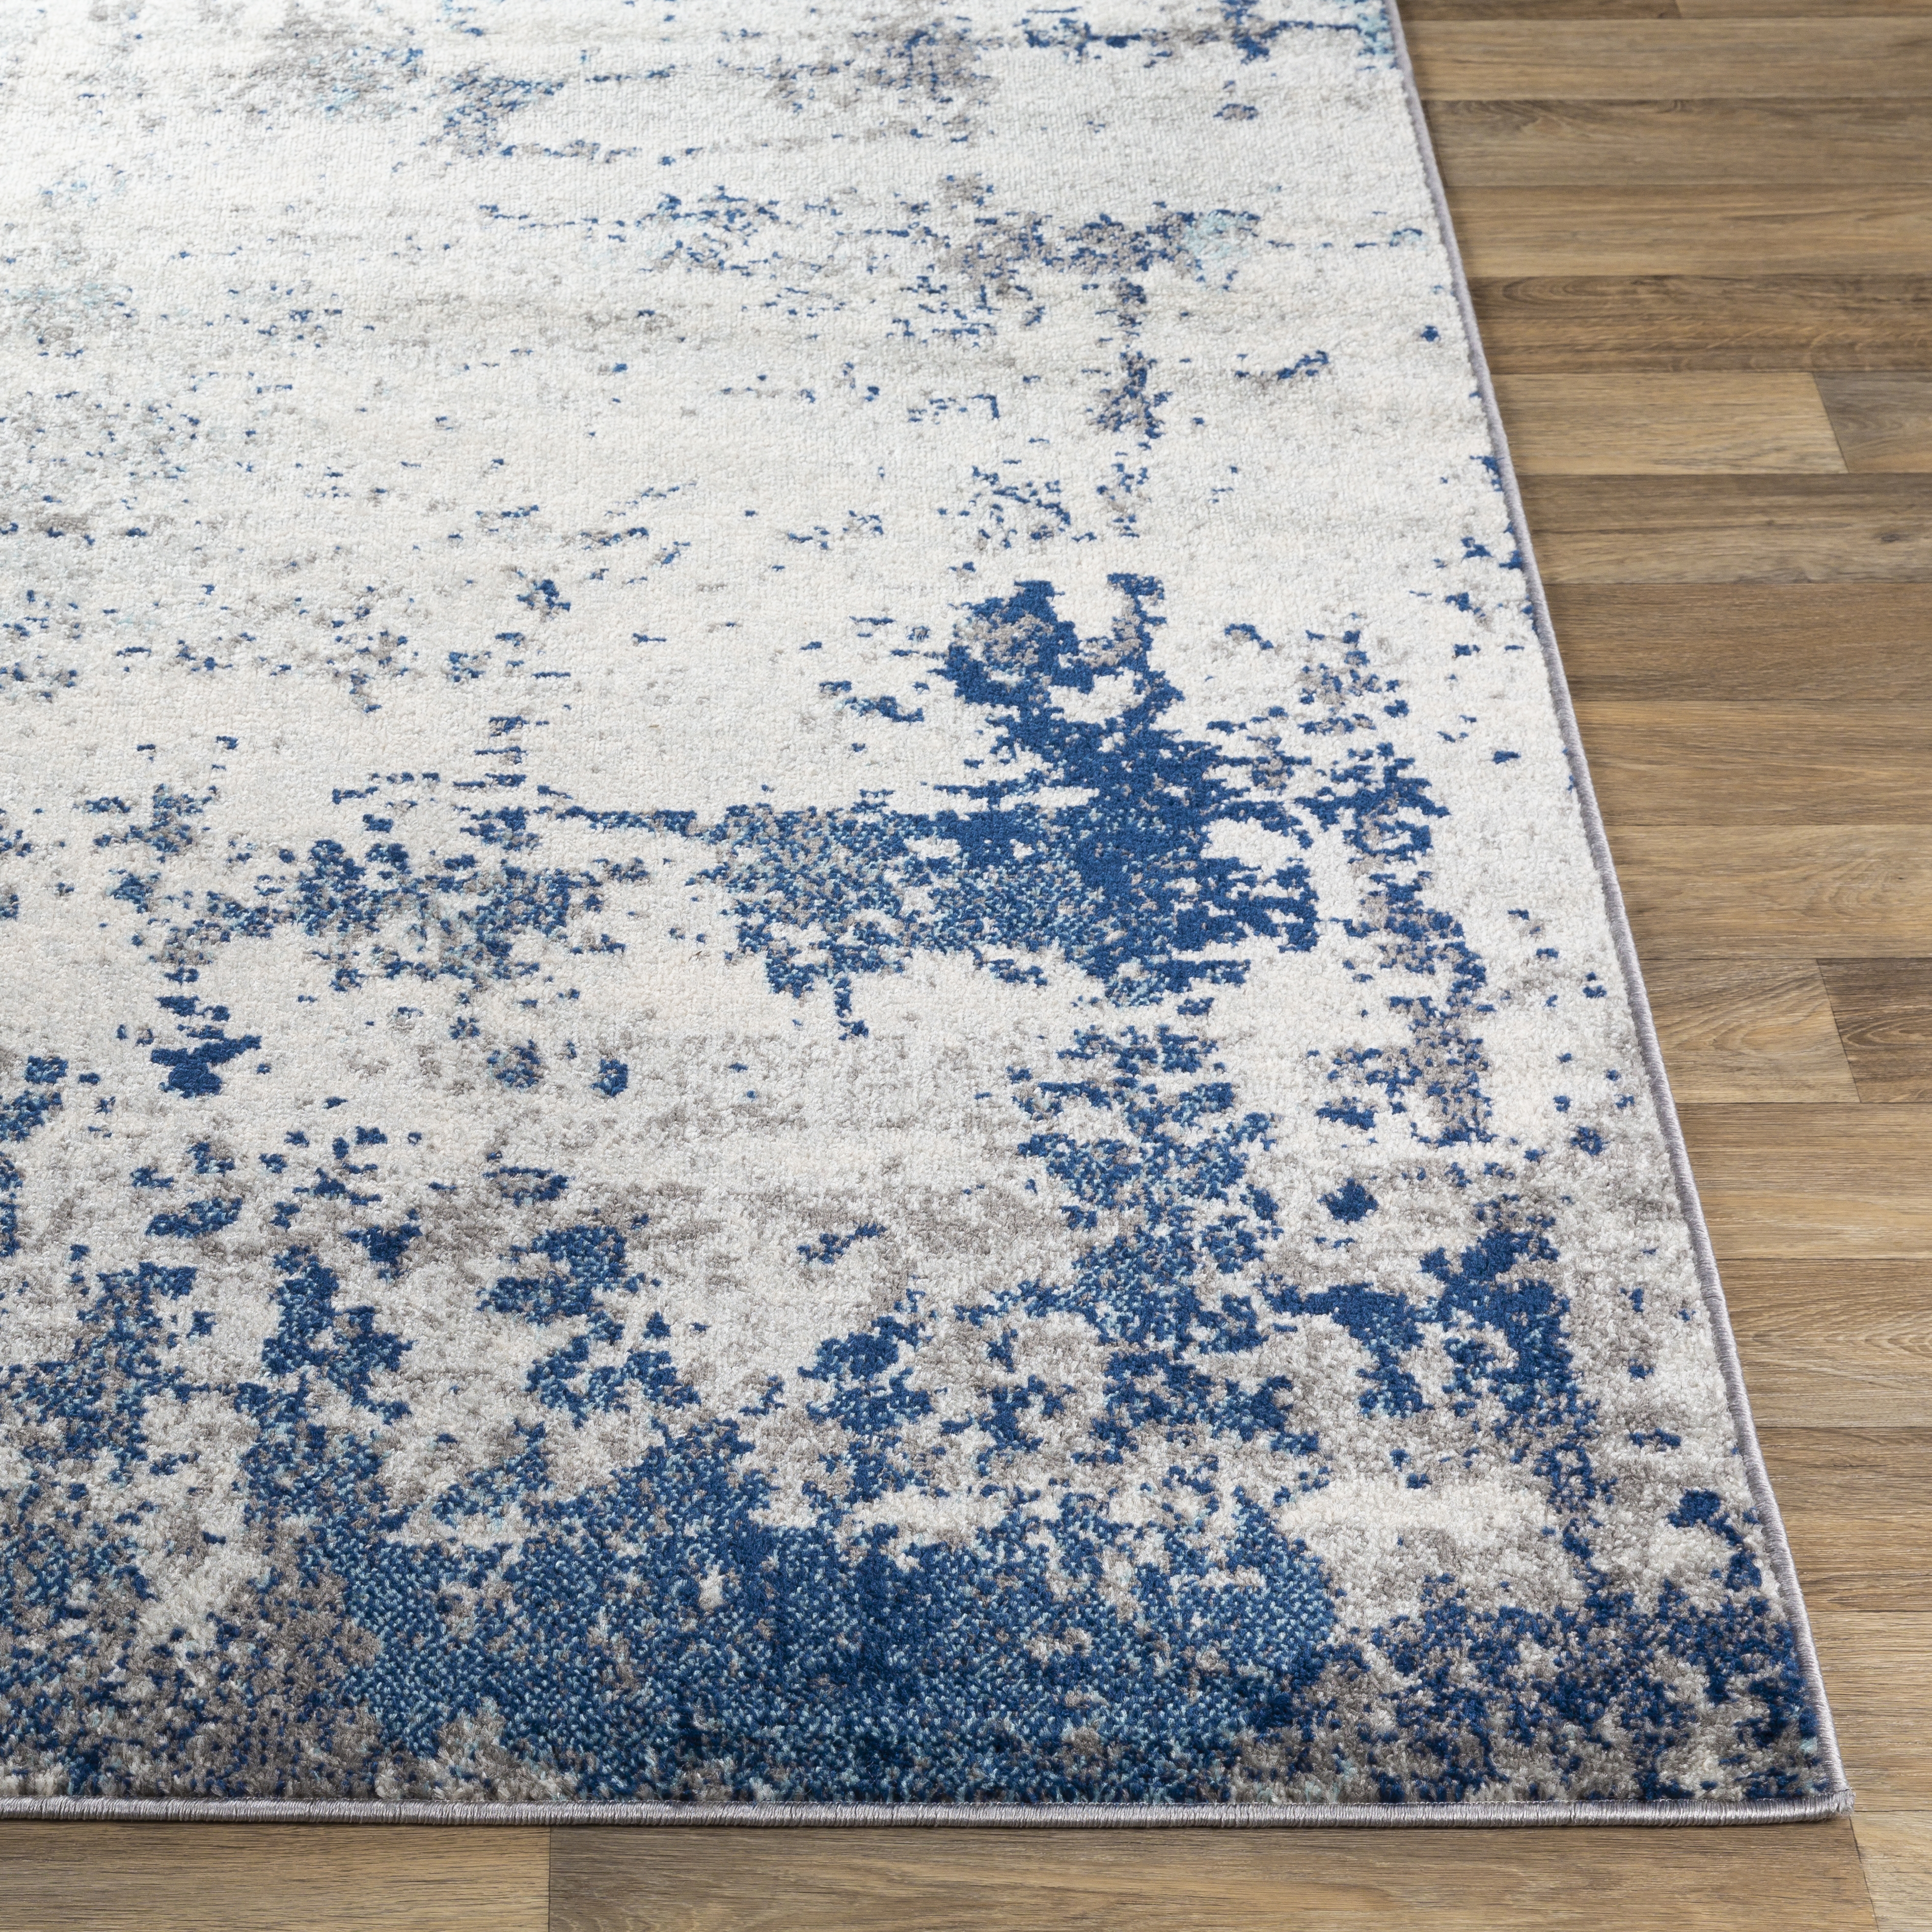 Chester Rug, 7'10" x 10'3" - Image 2